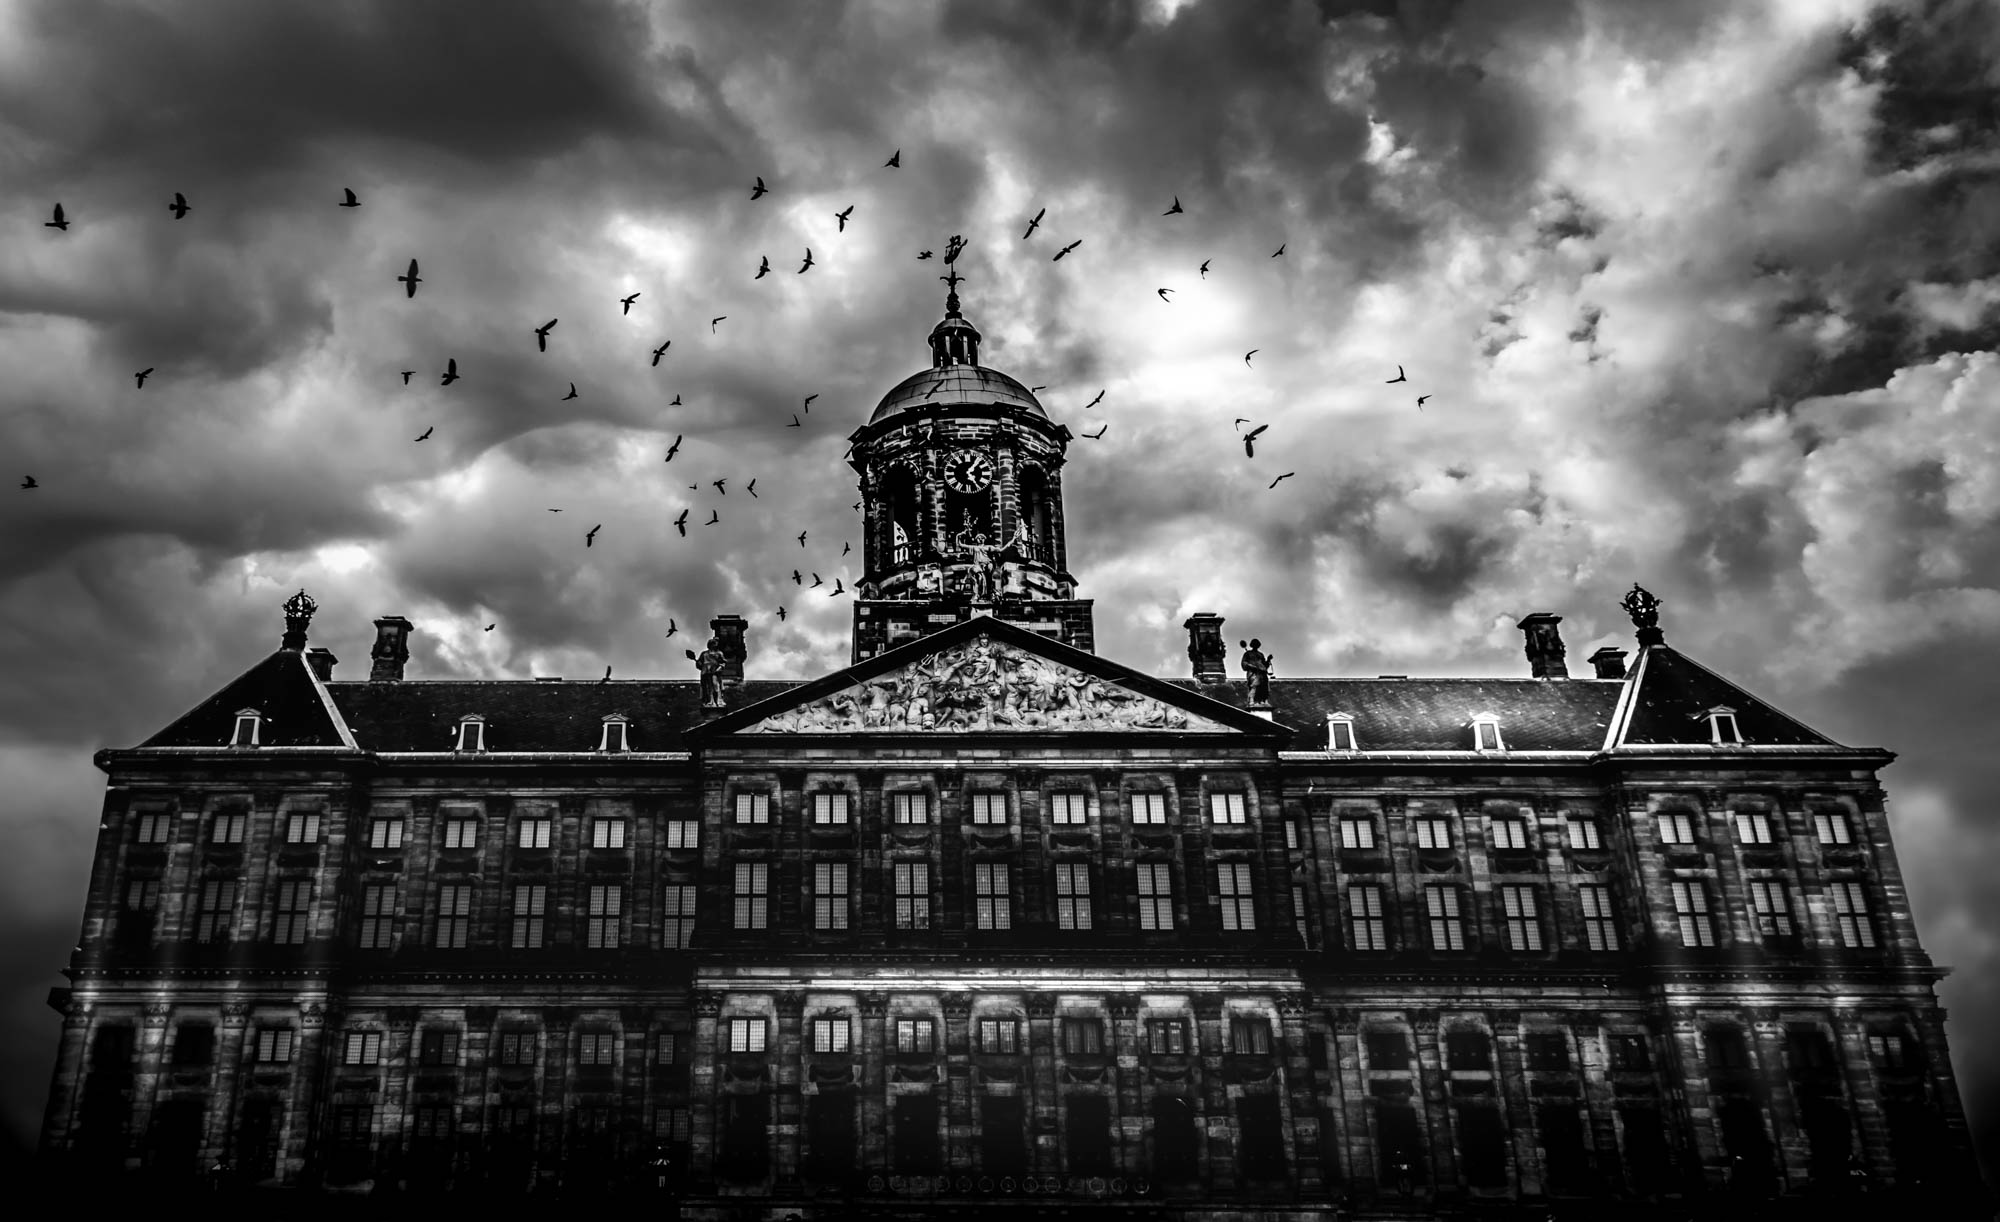 Title "A World of Fear" - Location: Amsterdam, Netherlands, 2017